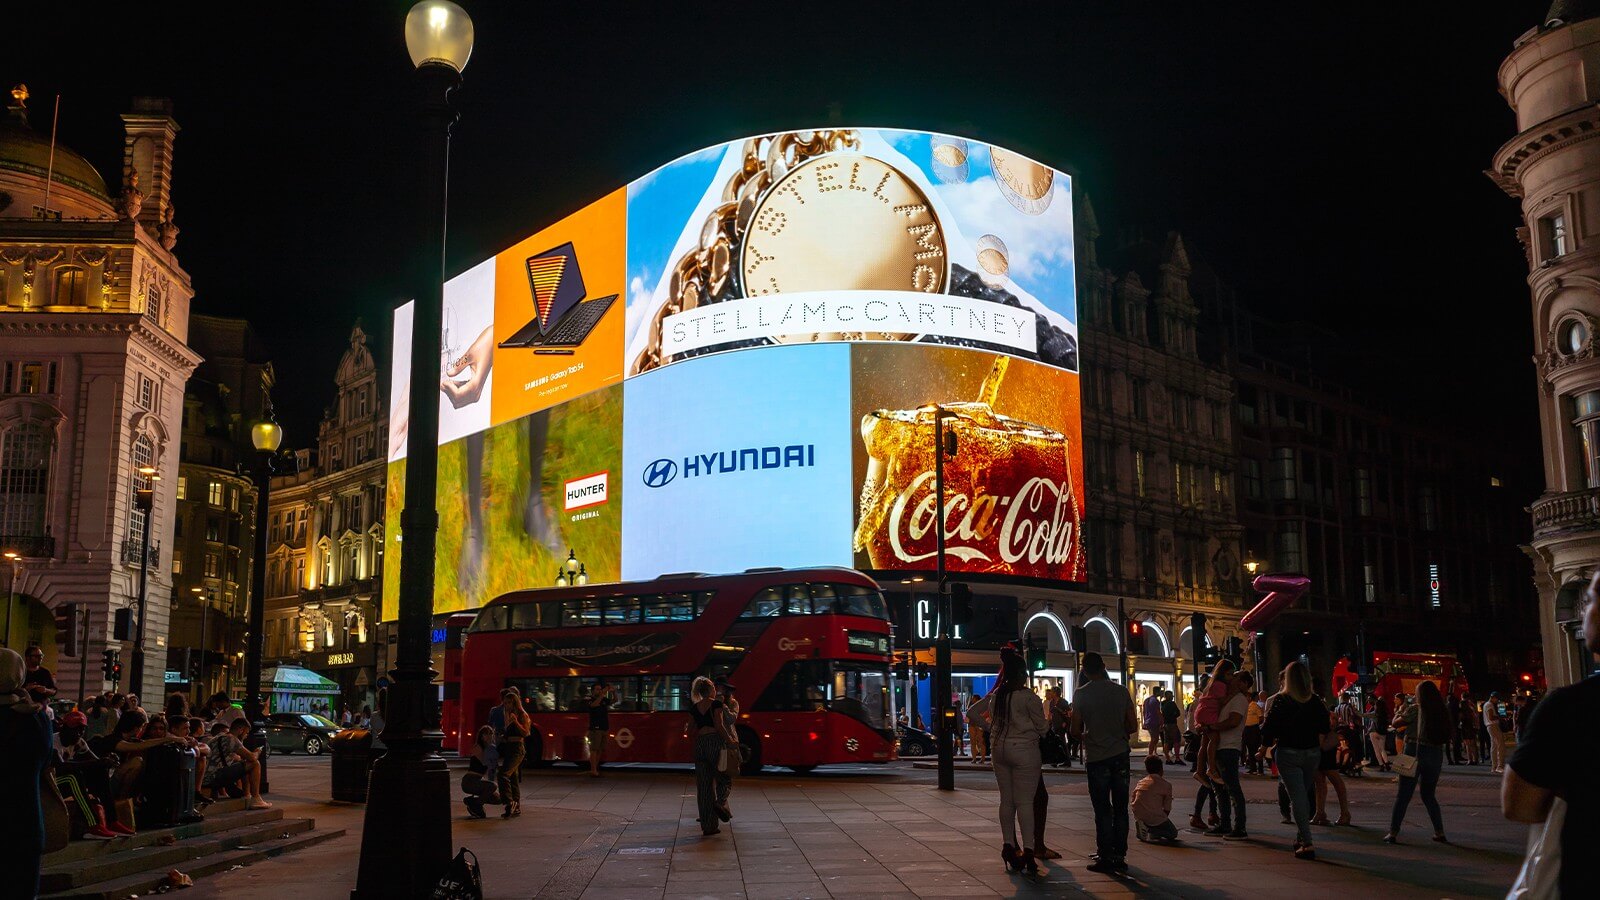 Digital Signage in Piccadilly Circus, London